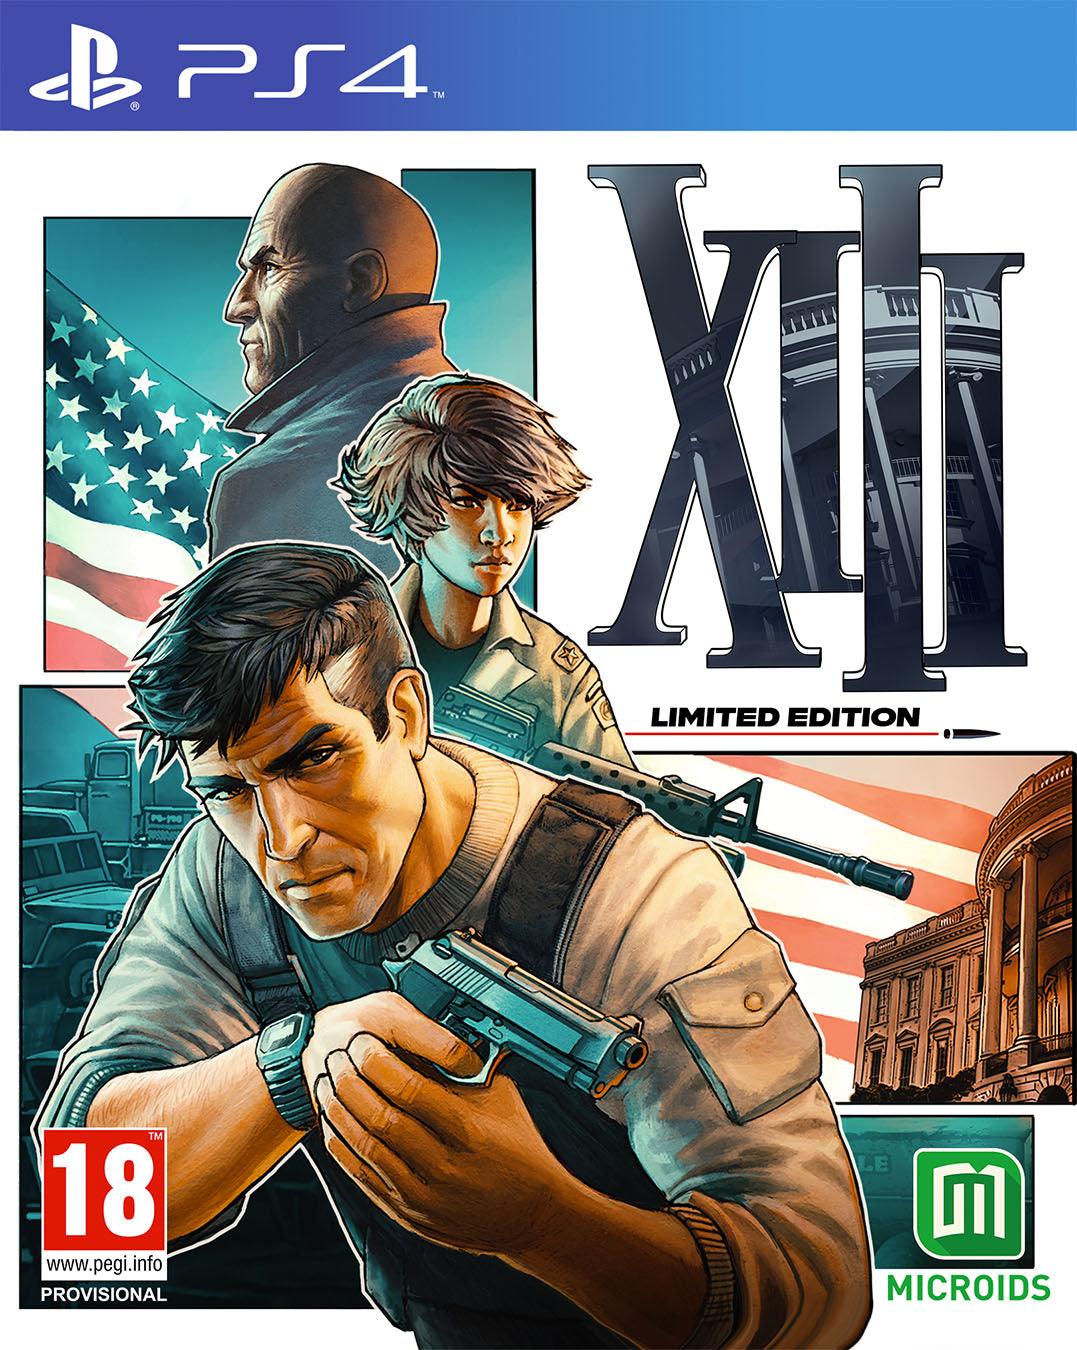 Xiii Limited Edition - Want a New Gadget